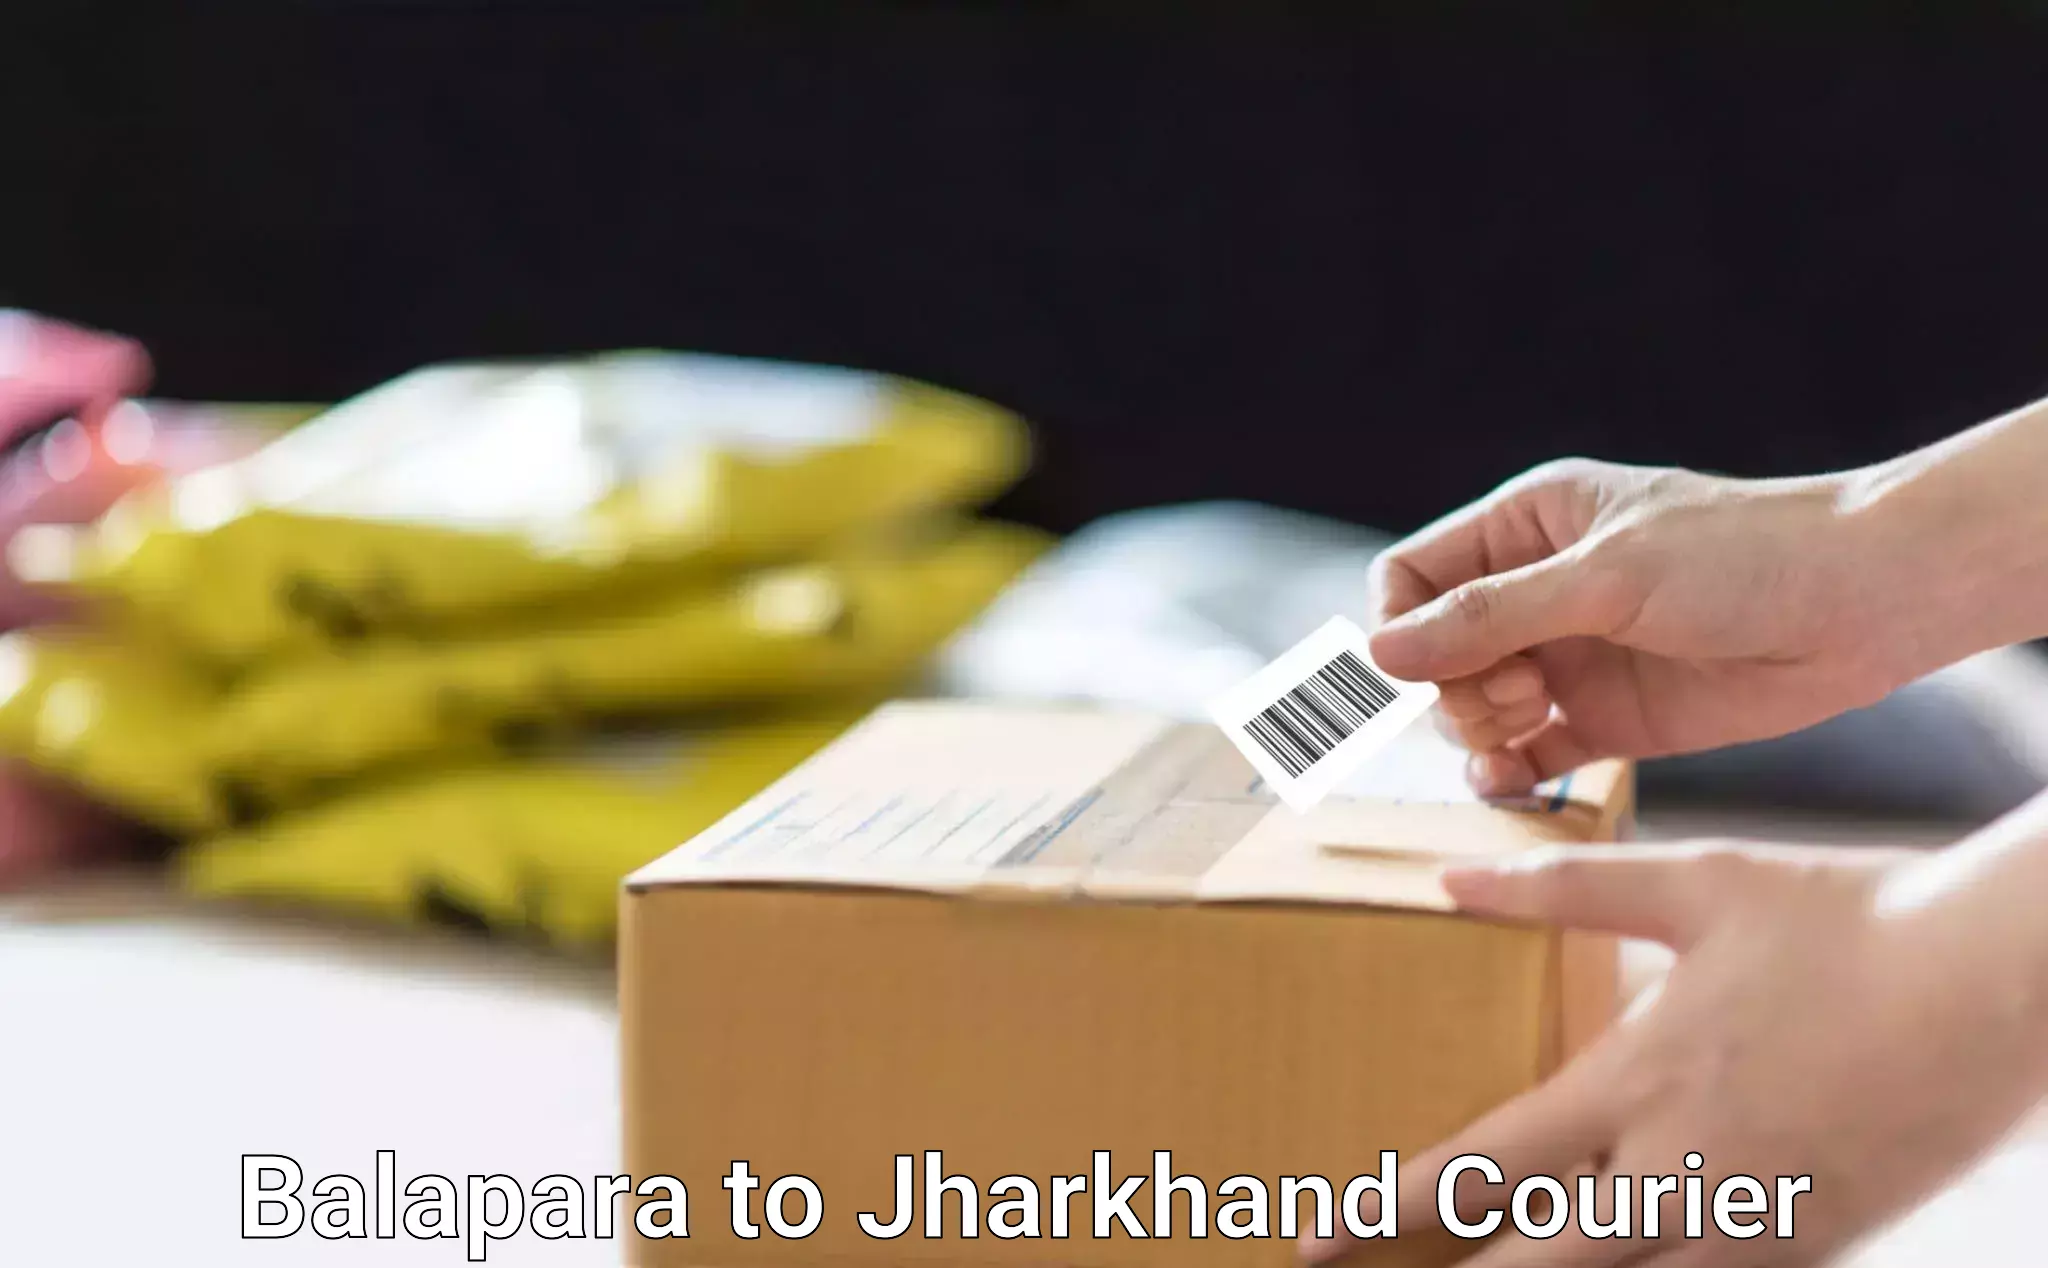 Rapid shipping services Balapara to Jharkhand